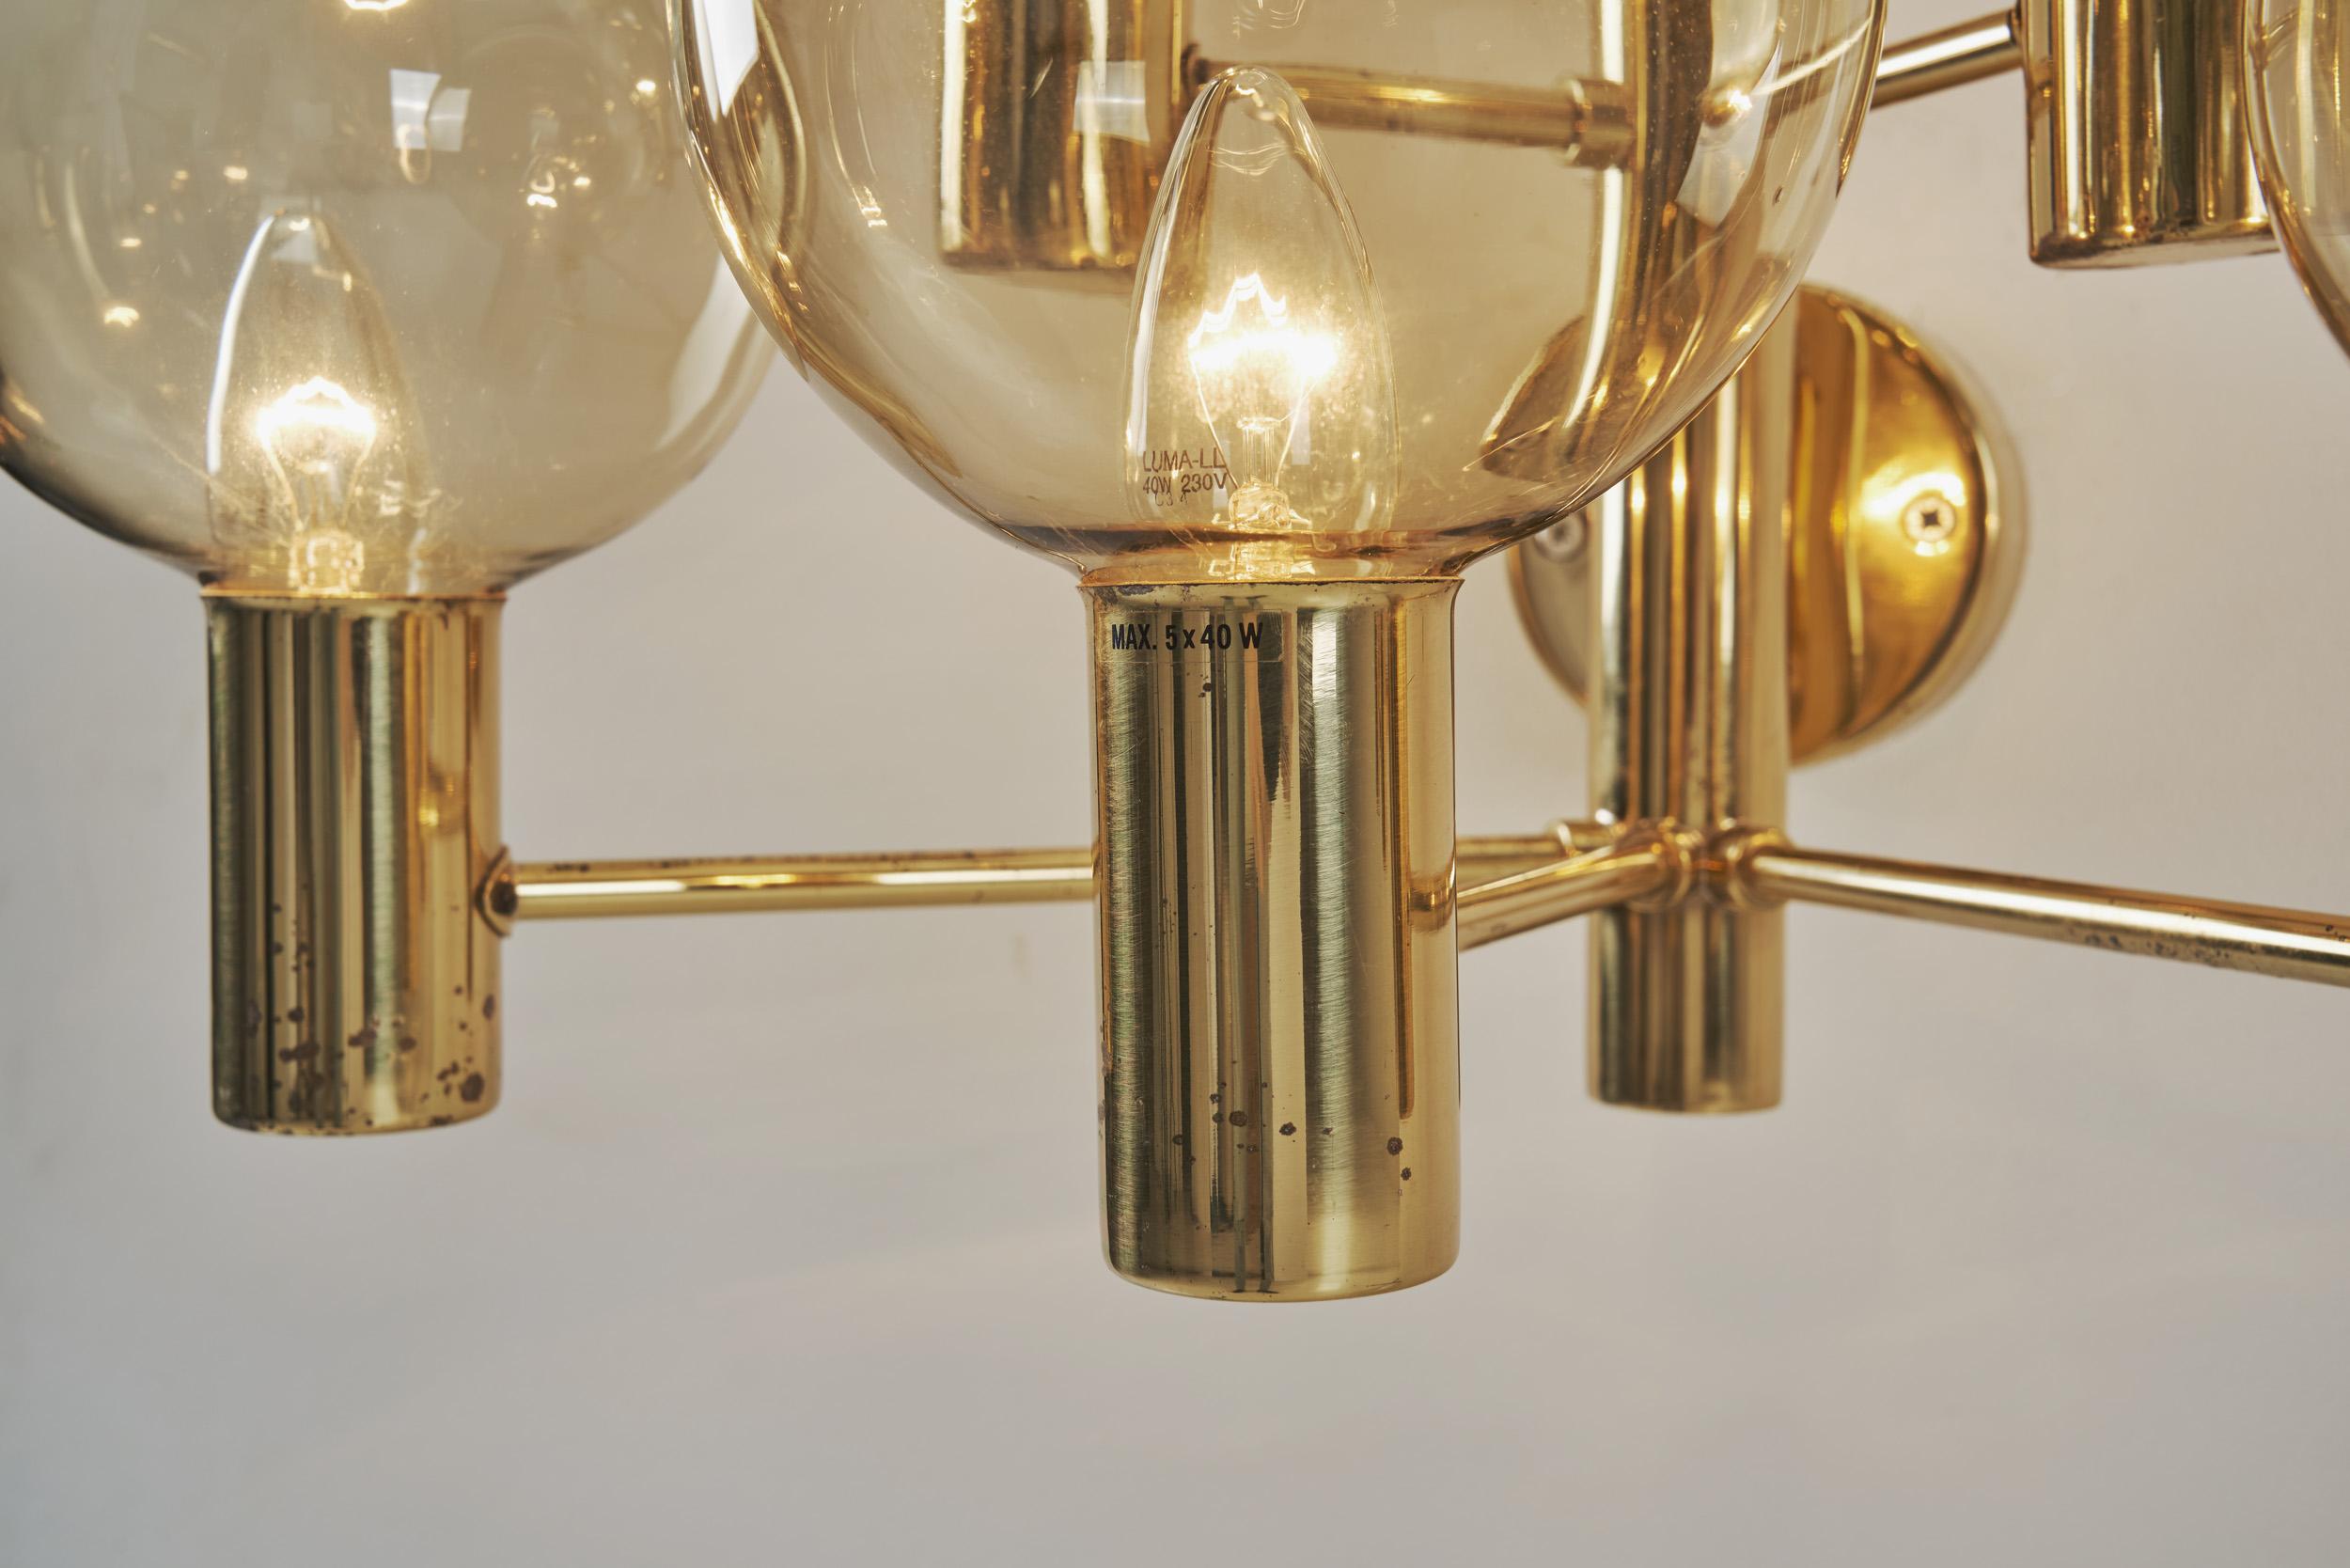 Hans-Agne Jakobsson Brass Wall Lamps with Smoked Glass Shades, Sweden 1960s For Sale 7